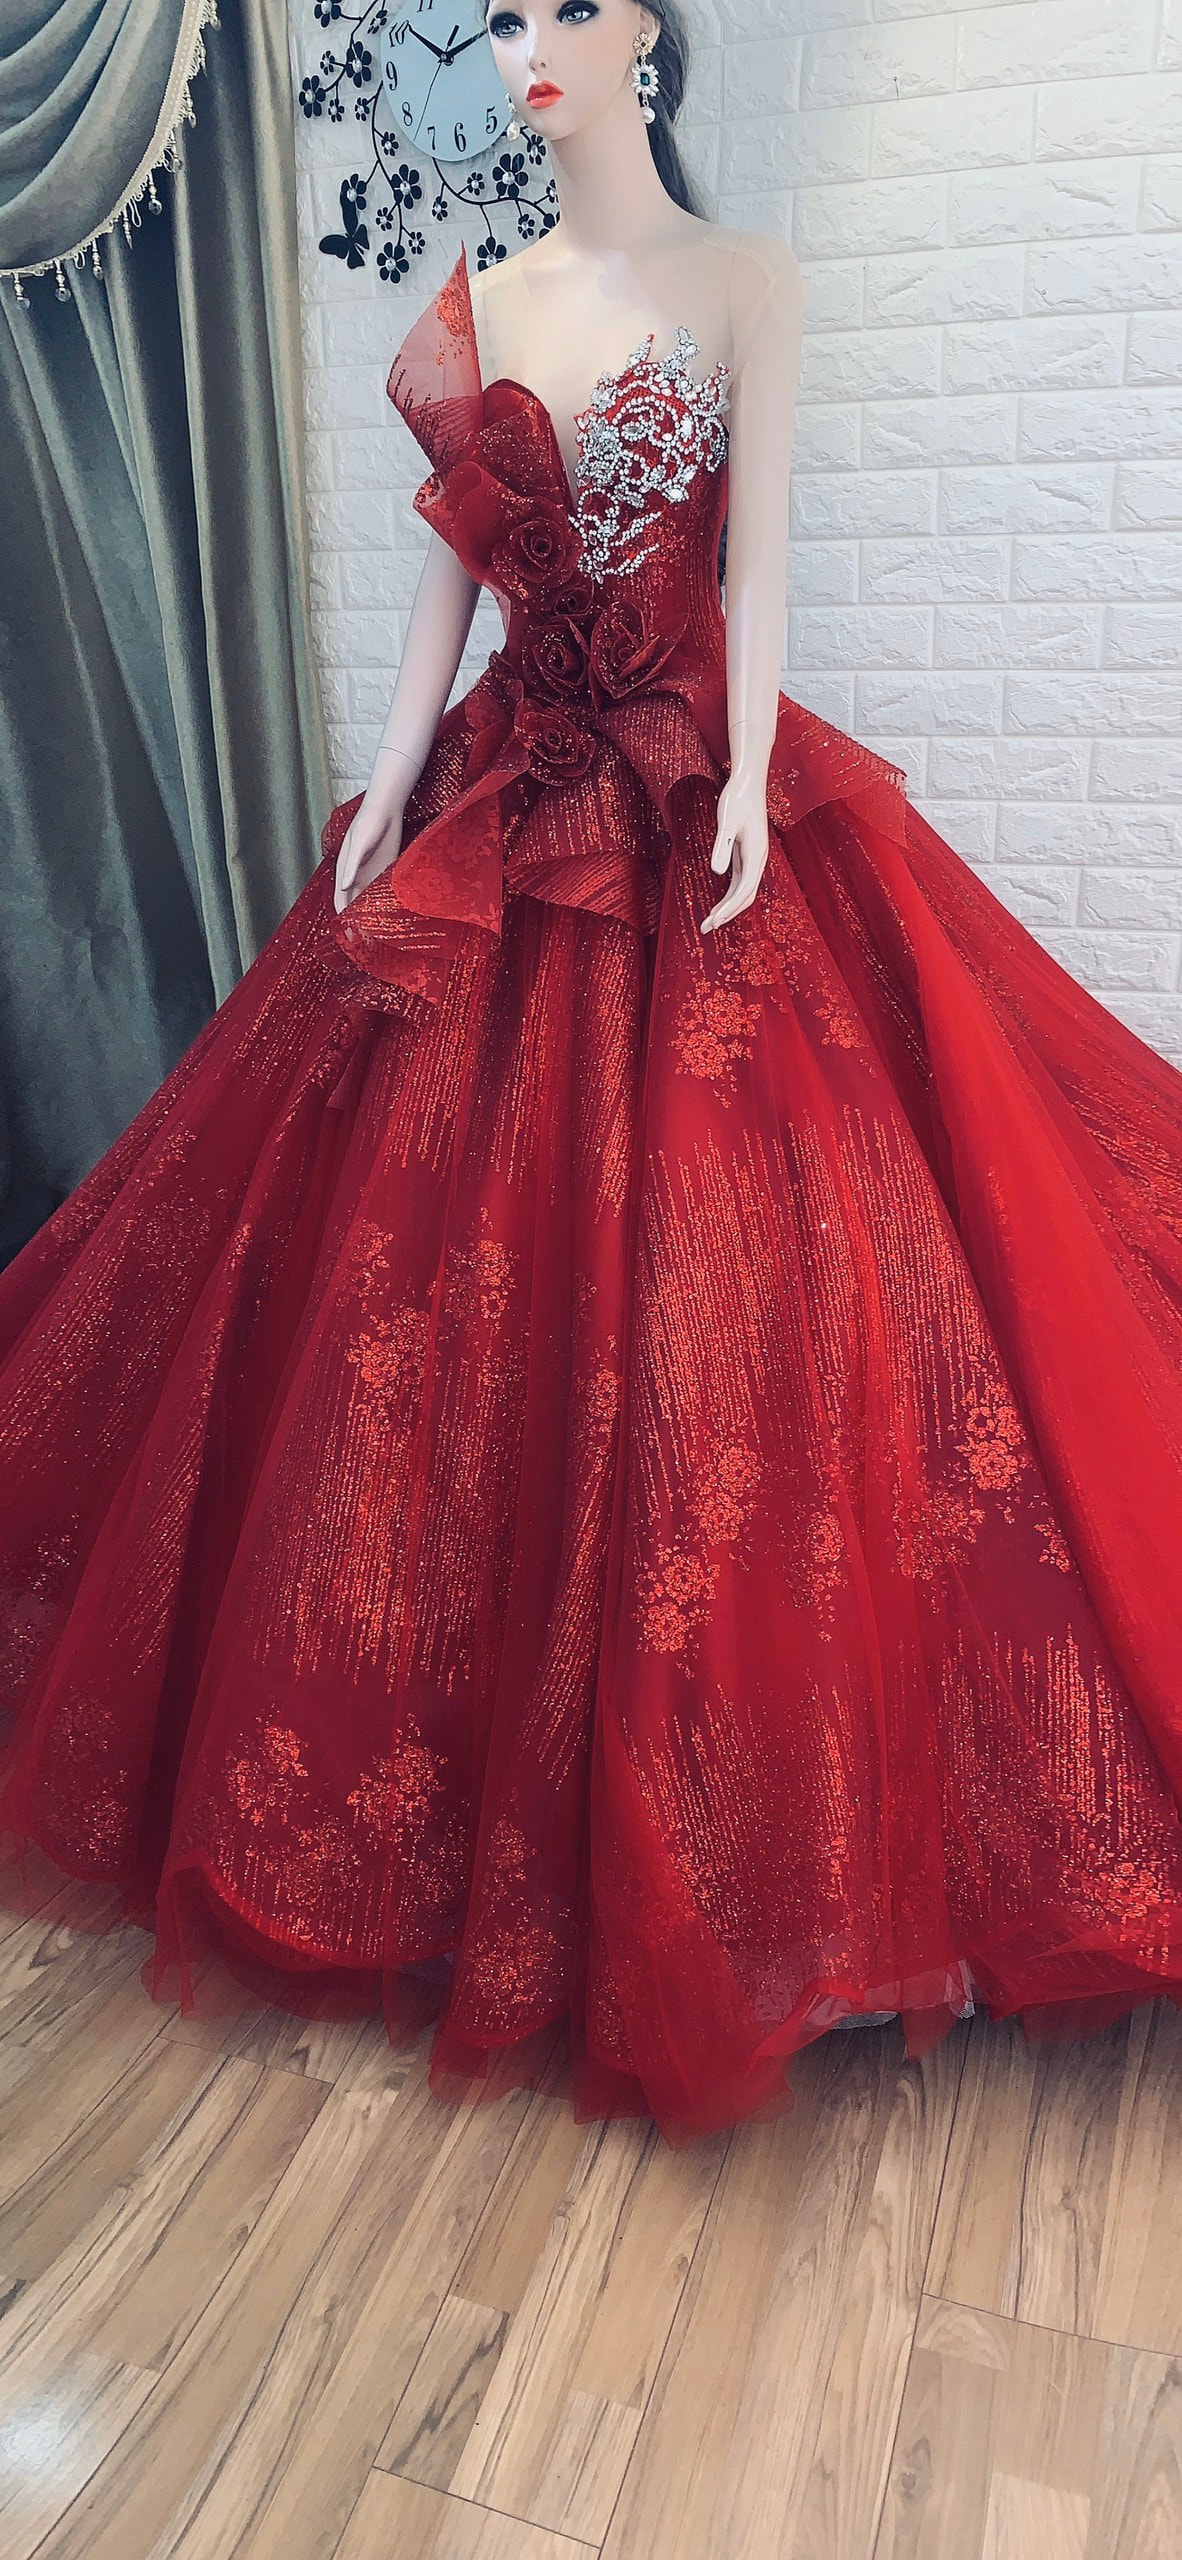 ELEGANT RED BARBIE GOWN WITH FULL SLEEVES - Women - 1740366367